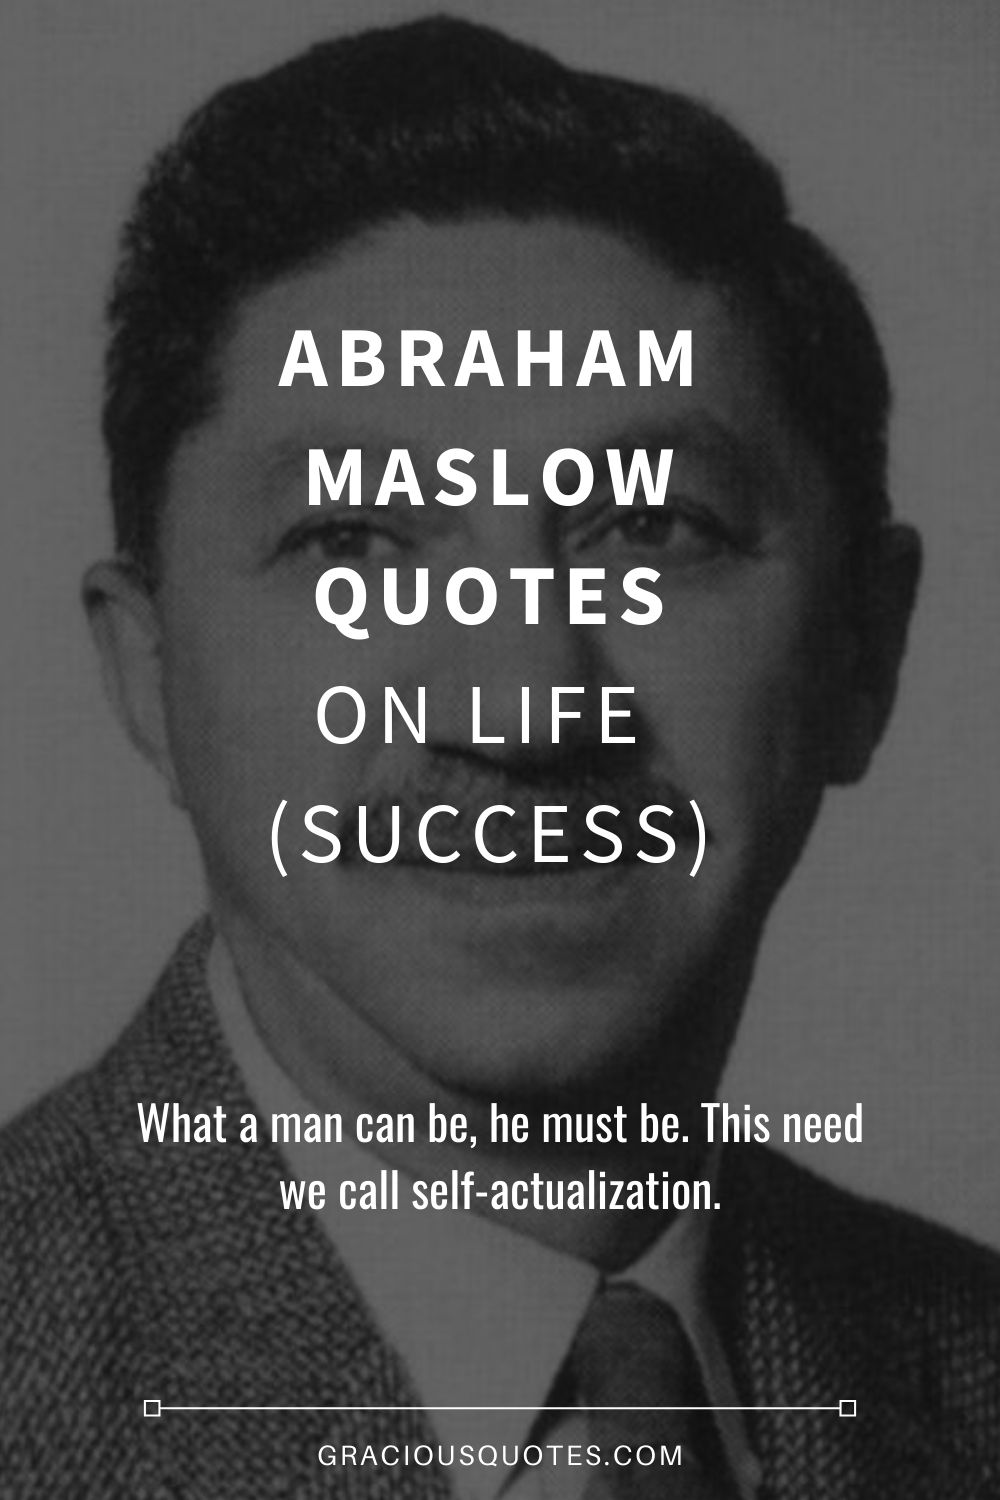 Abraham Maslow Quotes on Life (SUCCESS) - Gracious Quotes